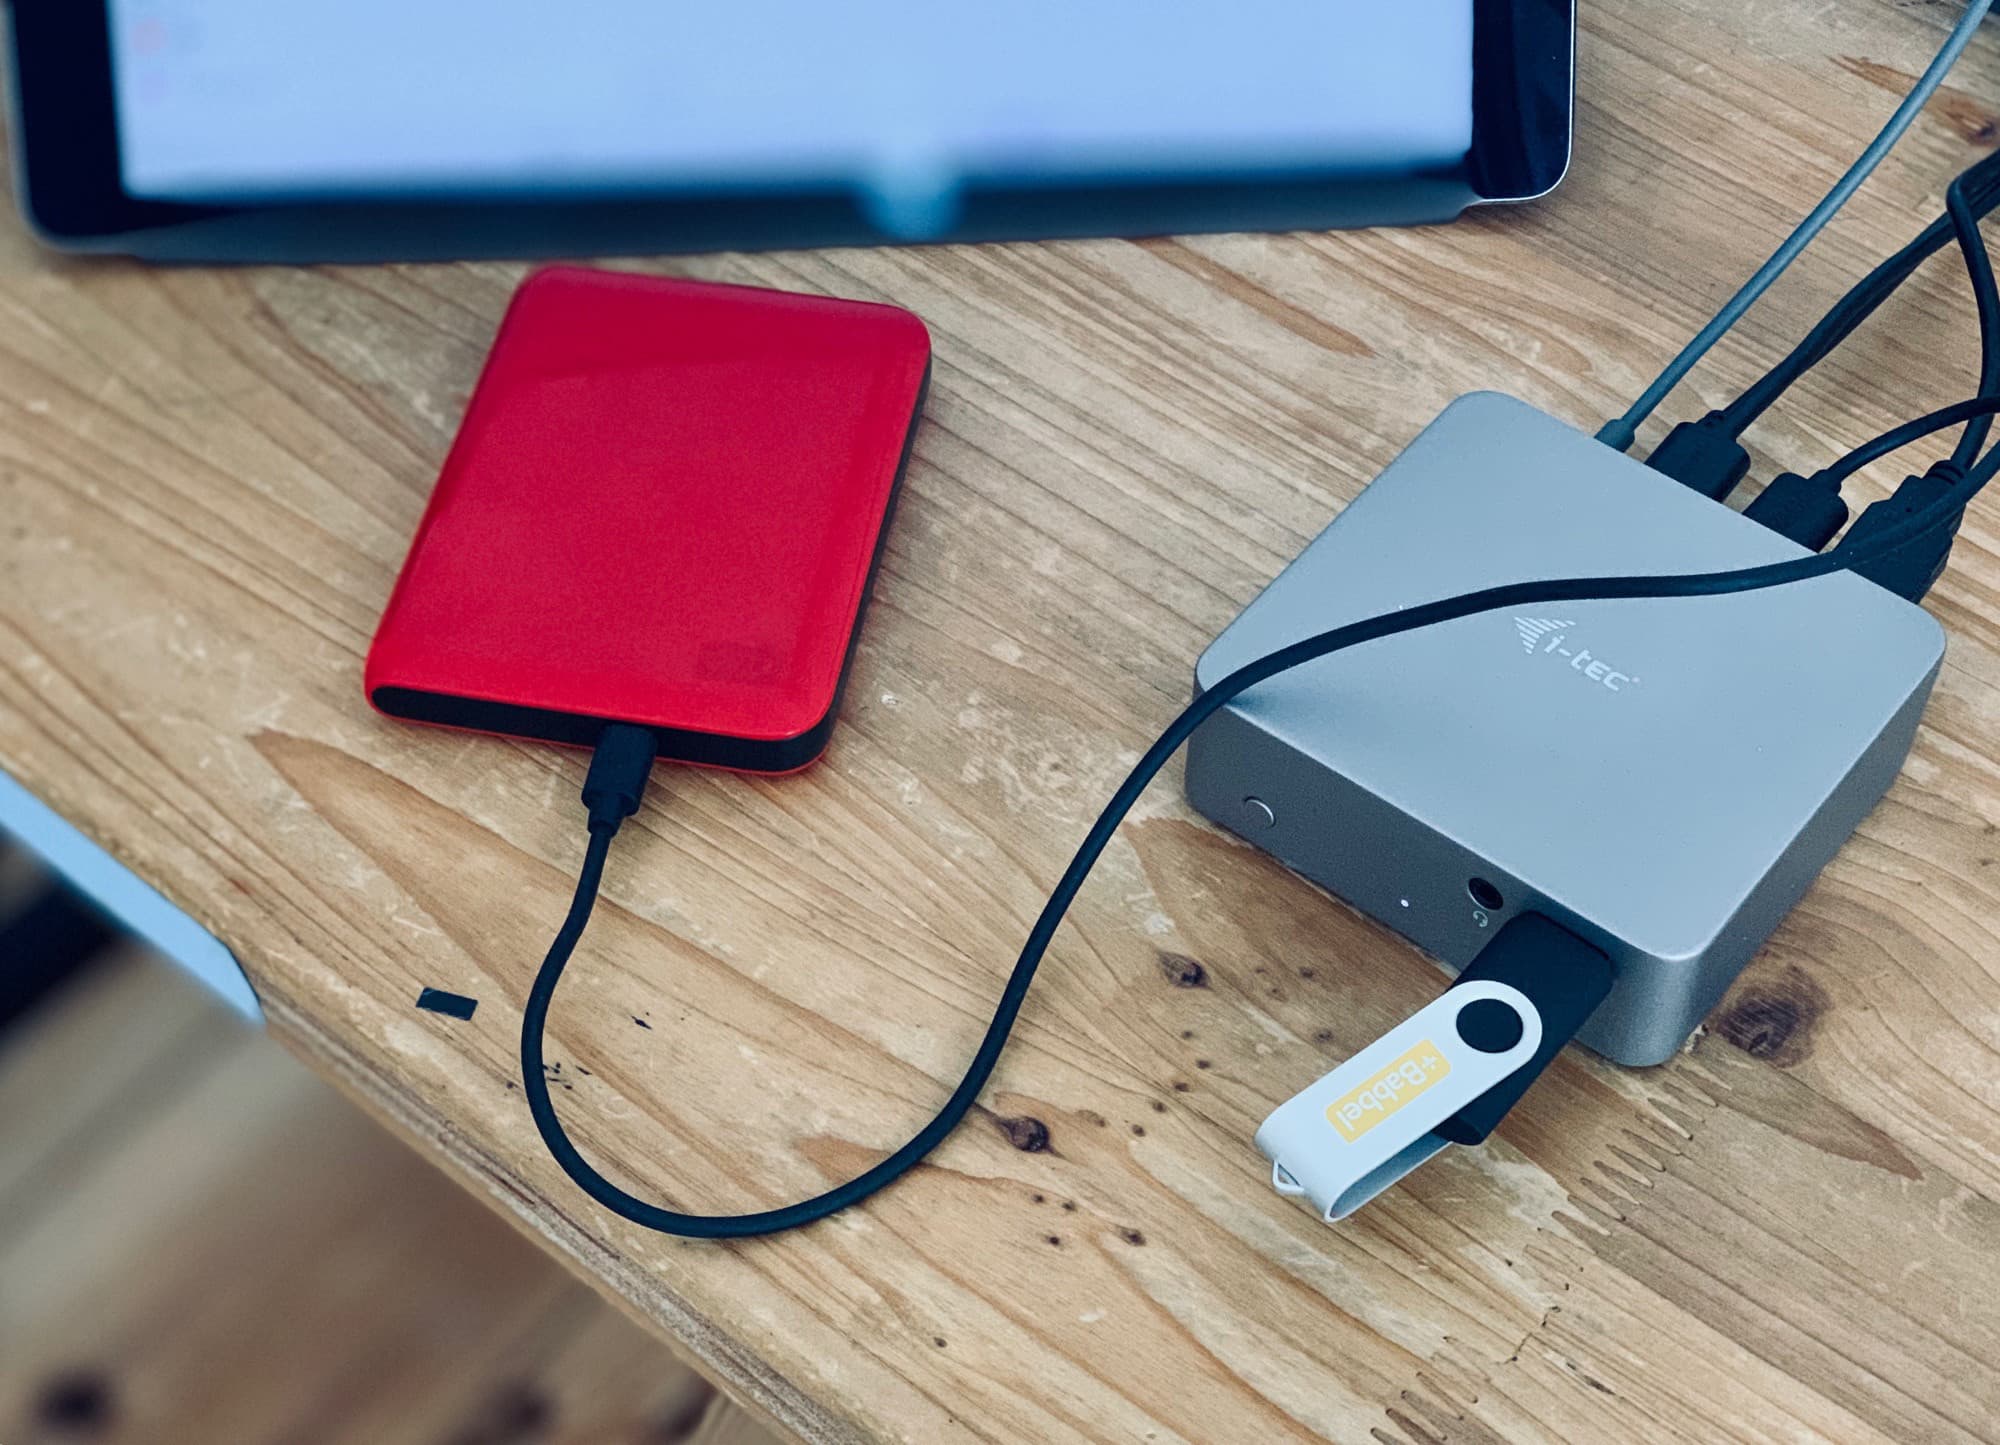 Hook up any and all USB storage devices to your iPad.